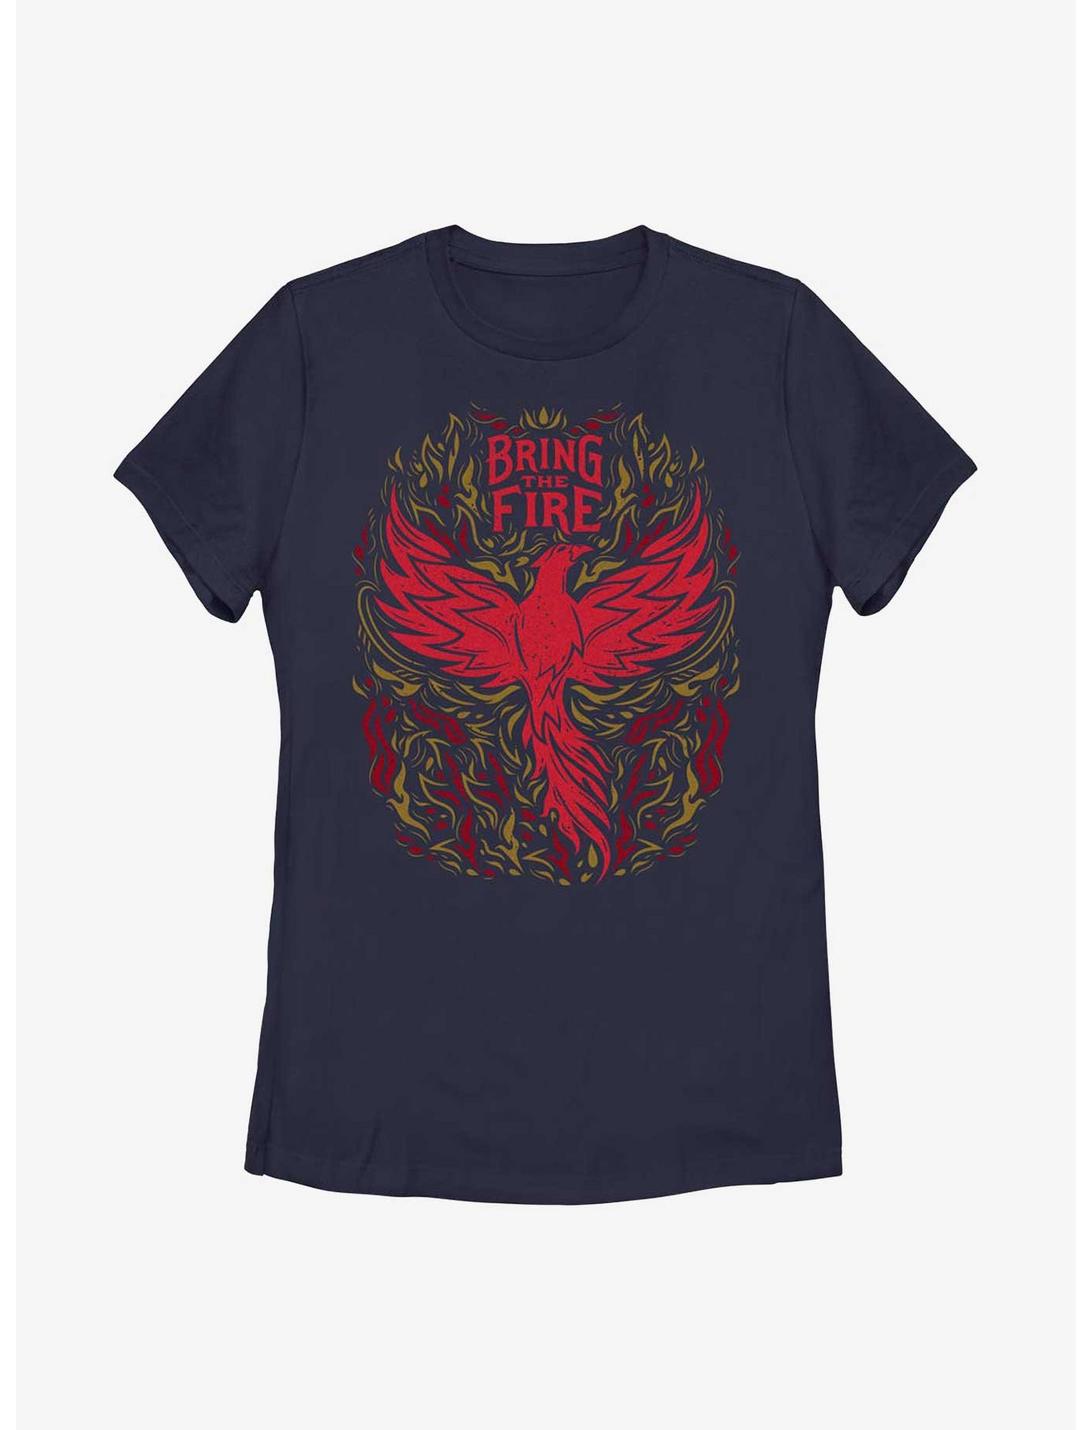 Shadow And Bone Bring The Fire Womens T-Shirt, NAVY, hi-res